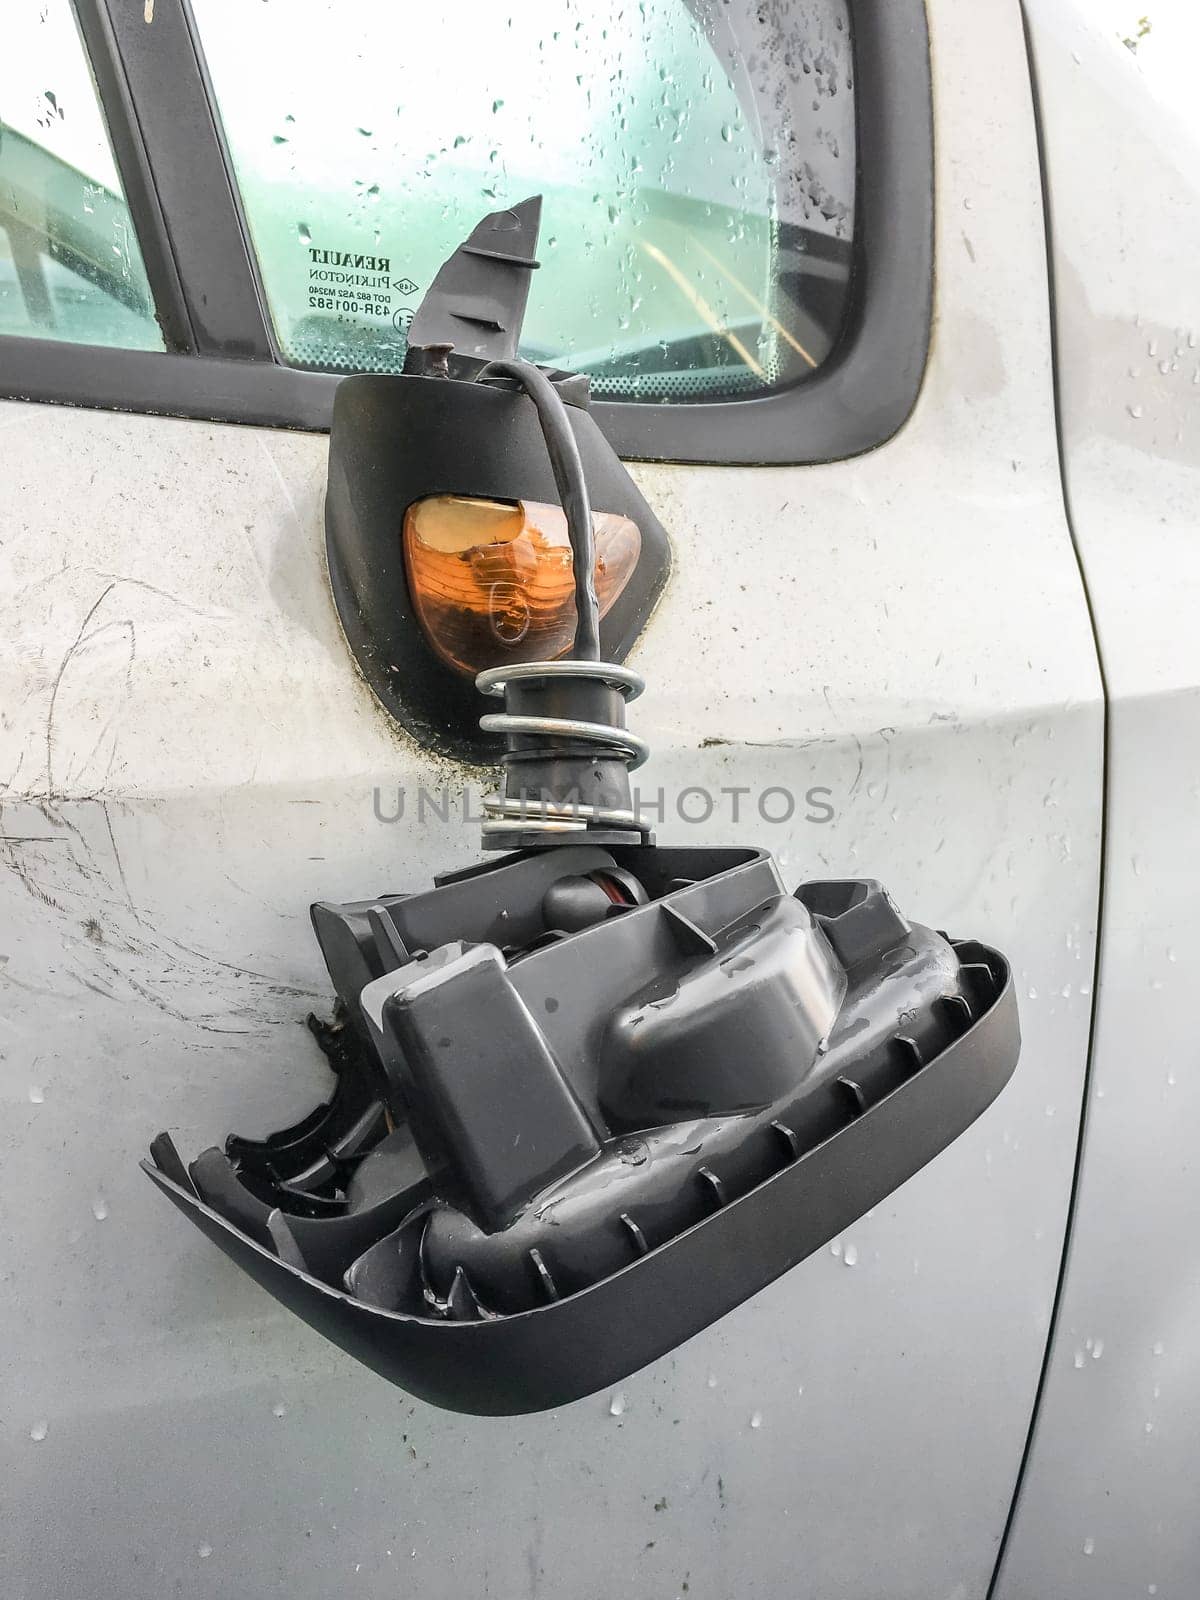 Smashed wing mirror by germanopoli